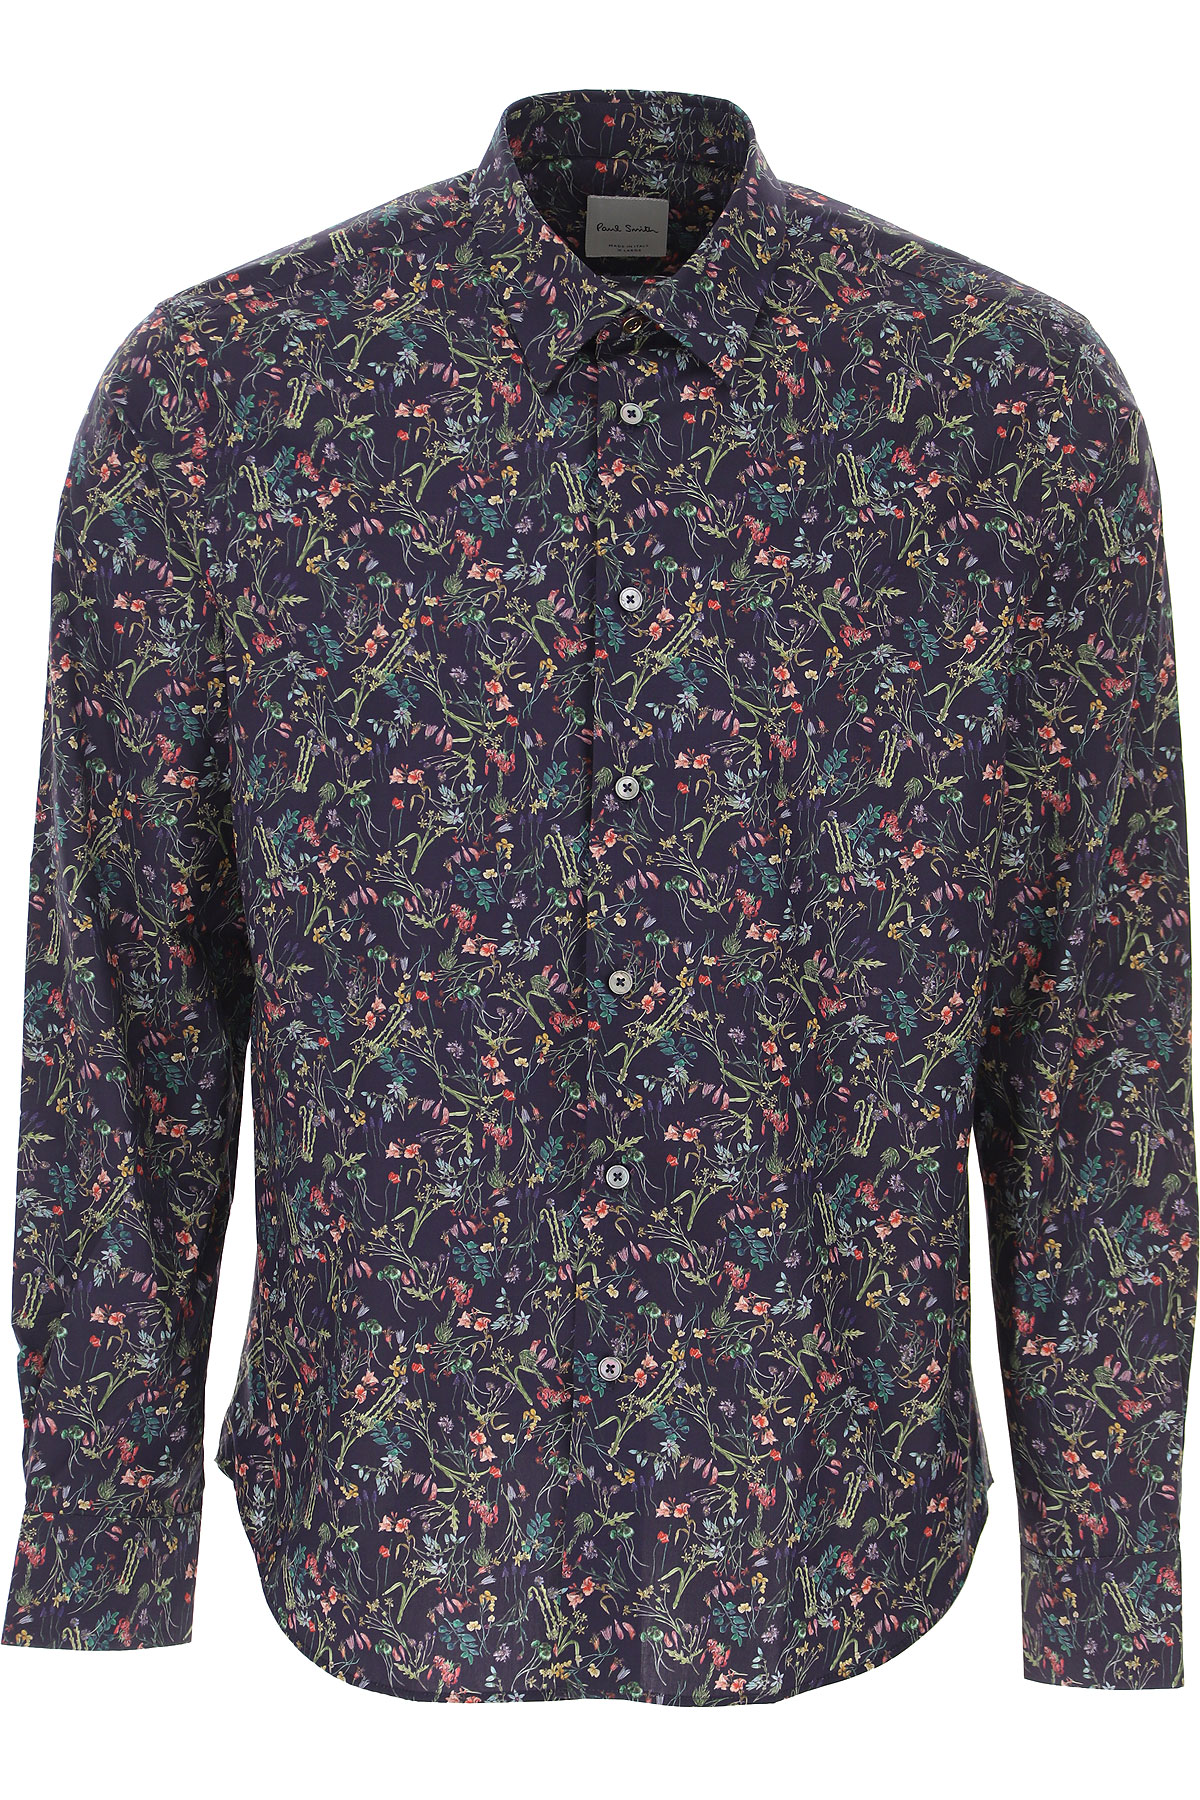 Mens Clothing Paul Smith, Style code: m1r-006l-e01112